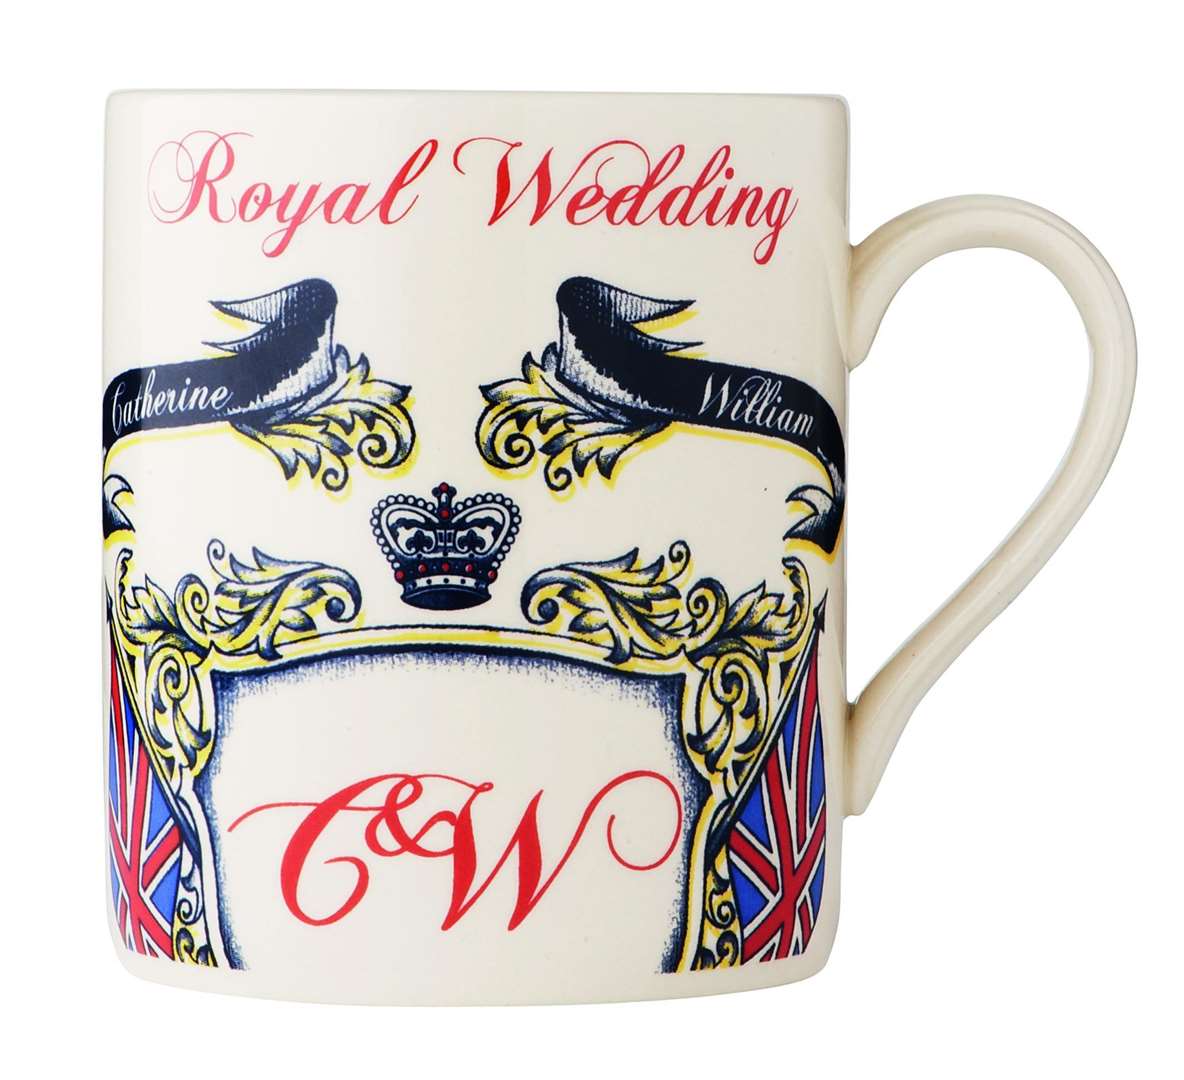 As the country got excited for the wedding of William and Catherine, M&S had a wedding range hit the shelves. Image: M&S.